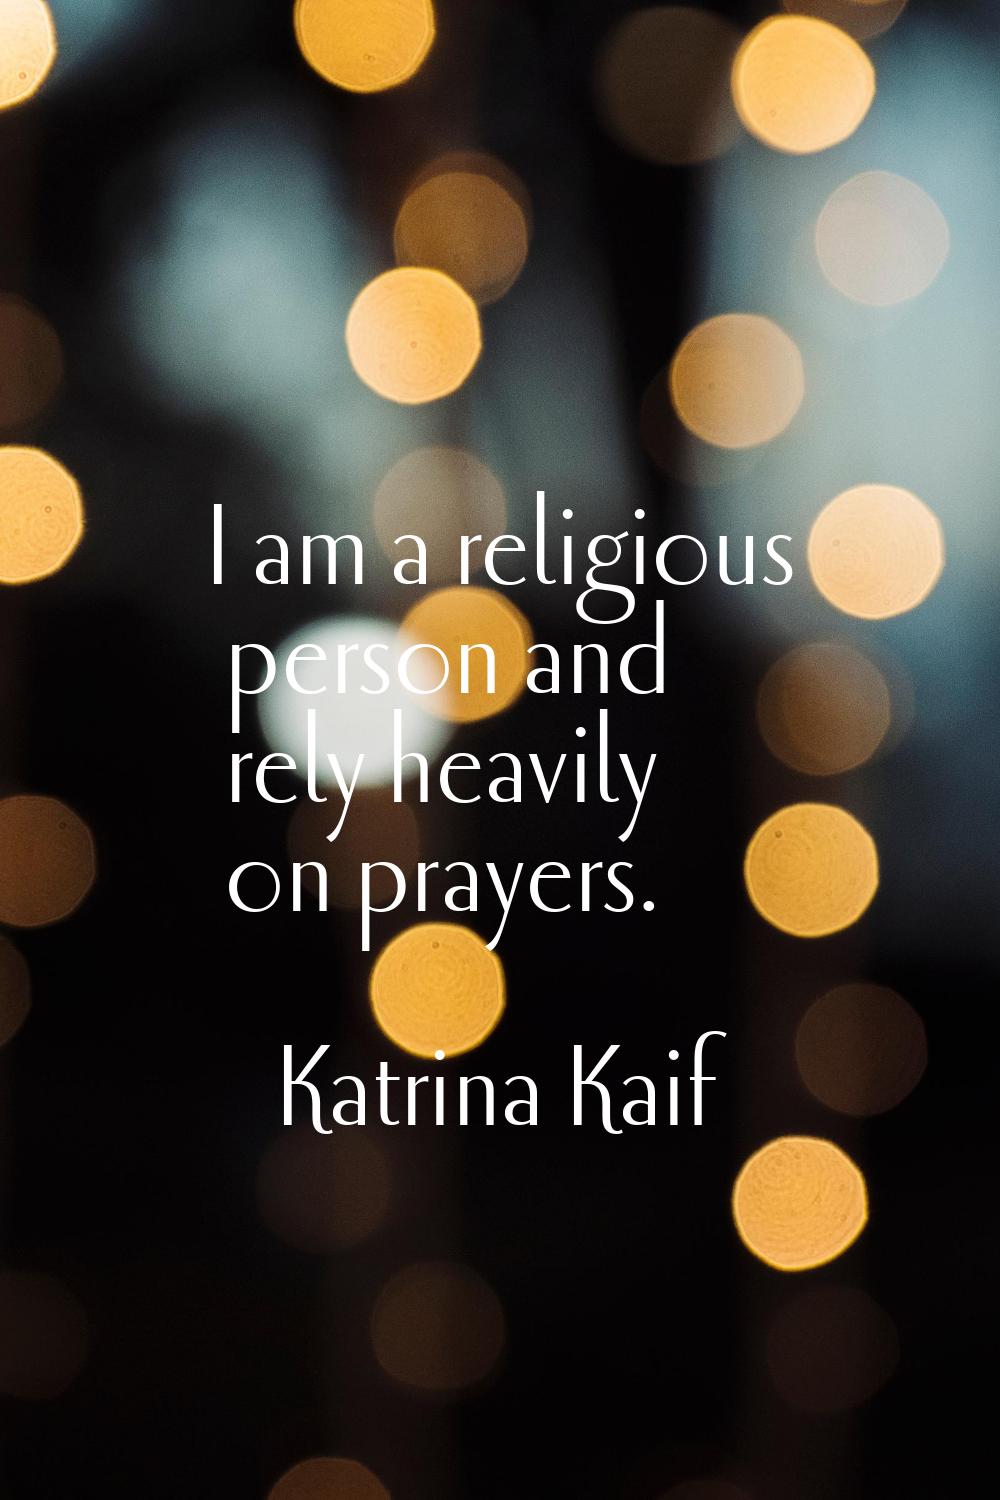 I am a religious person and rely heavily on prayers.